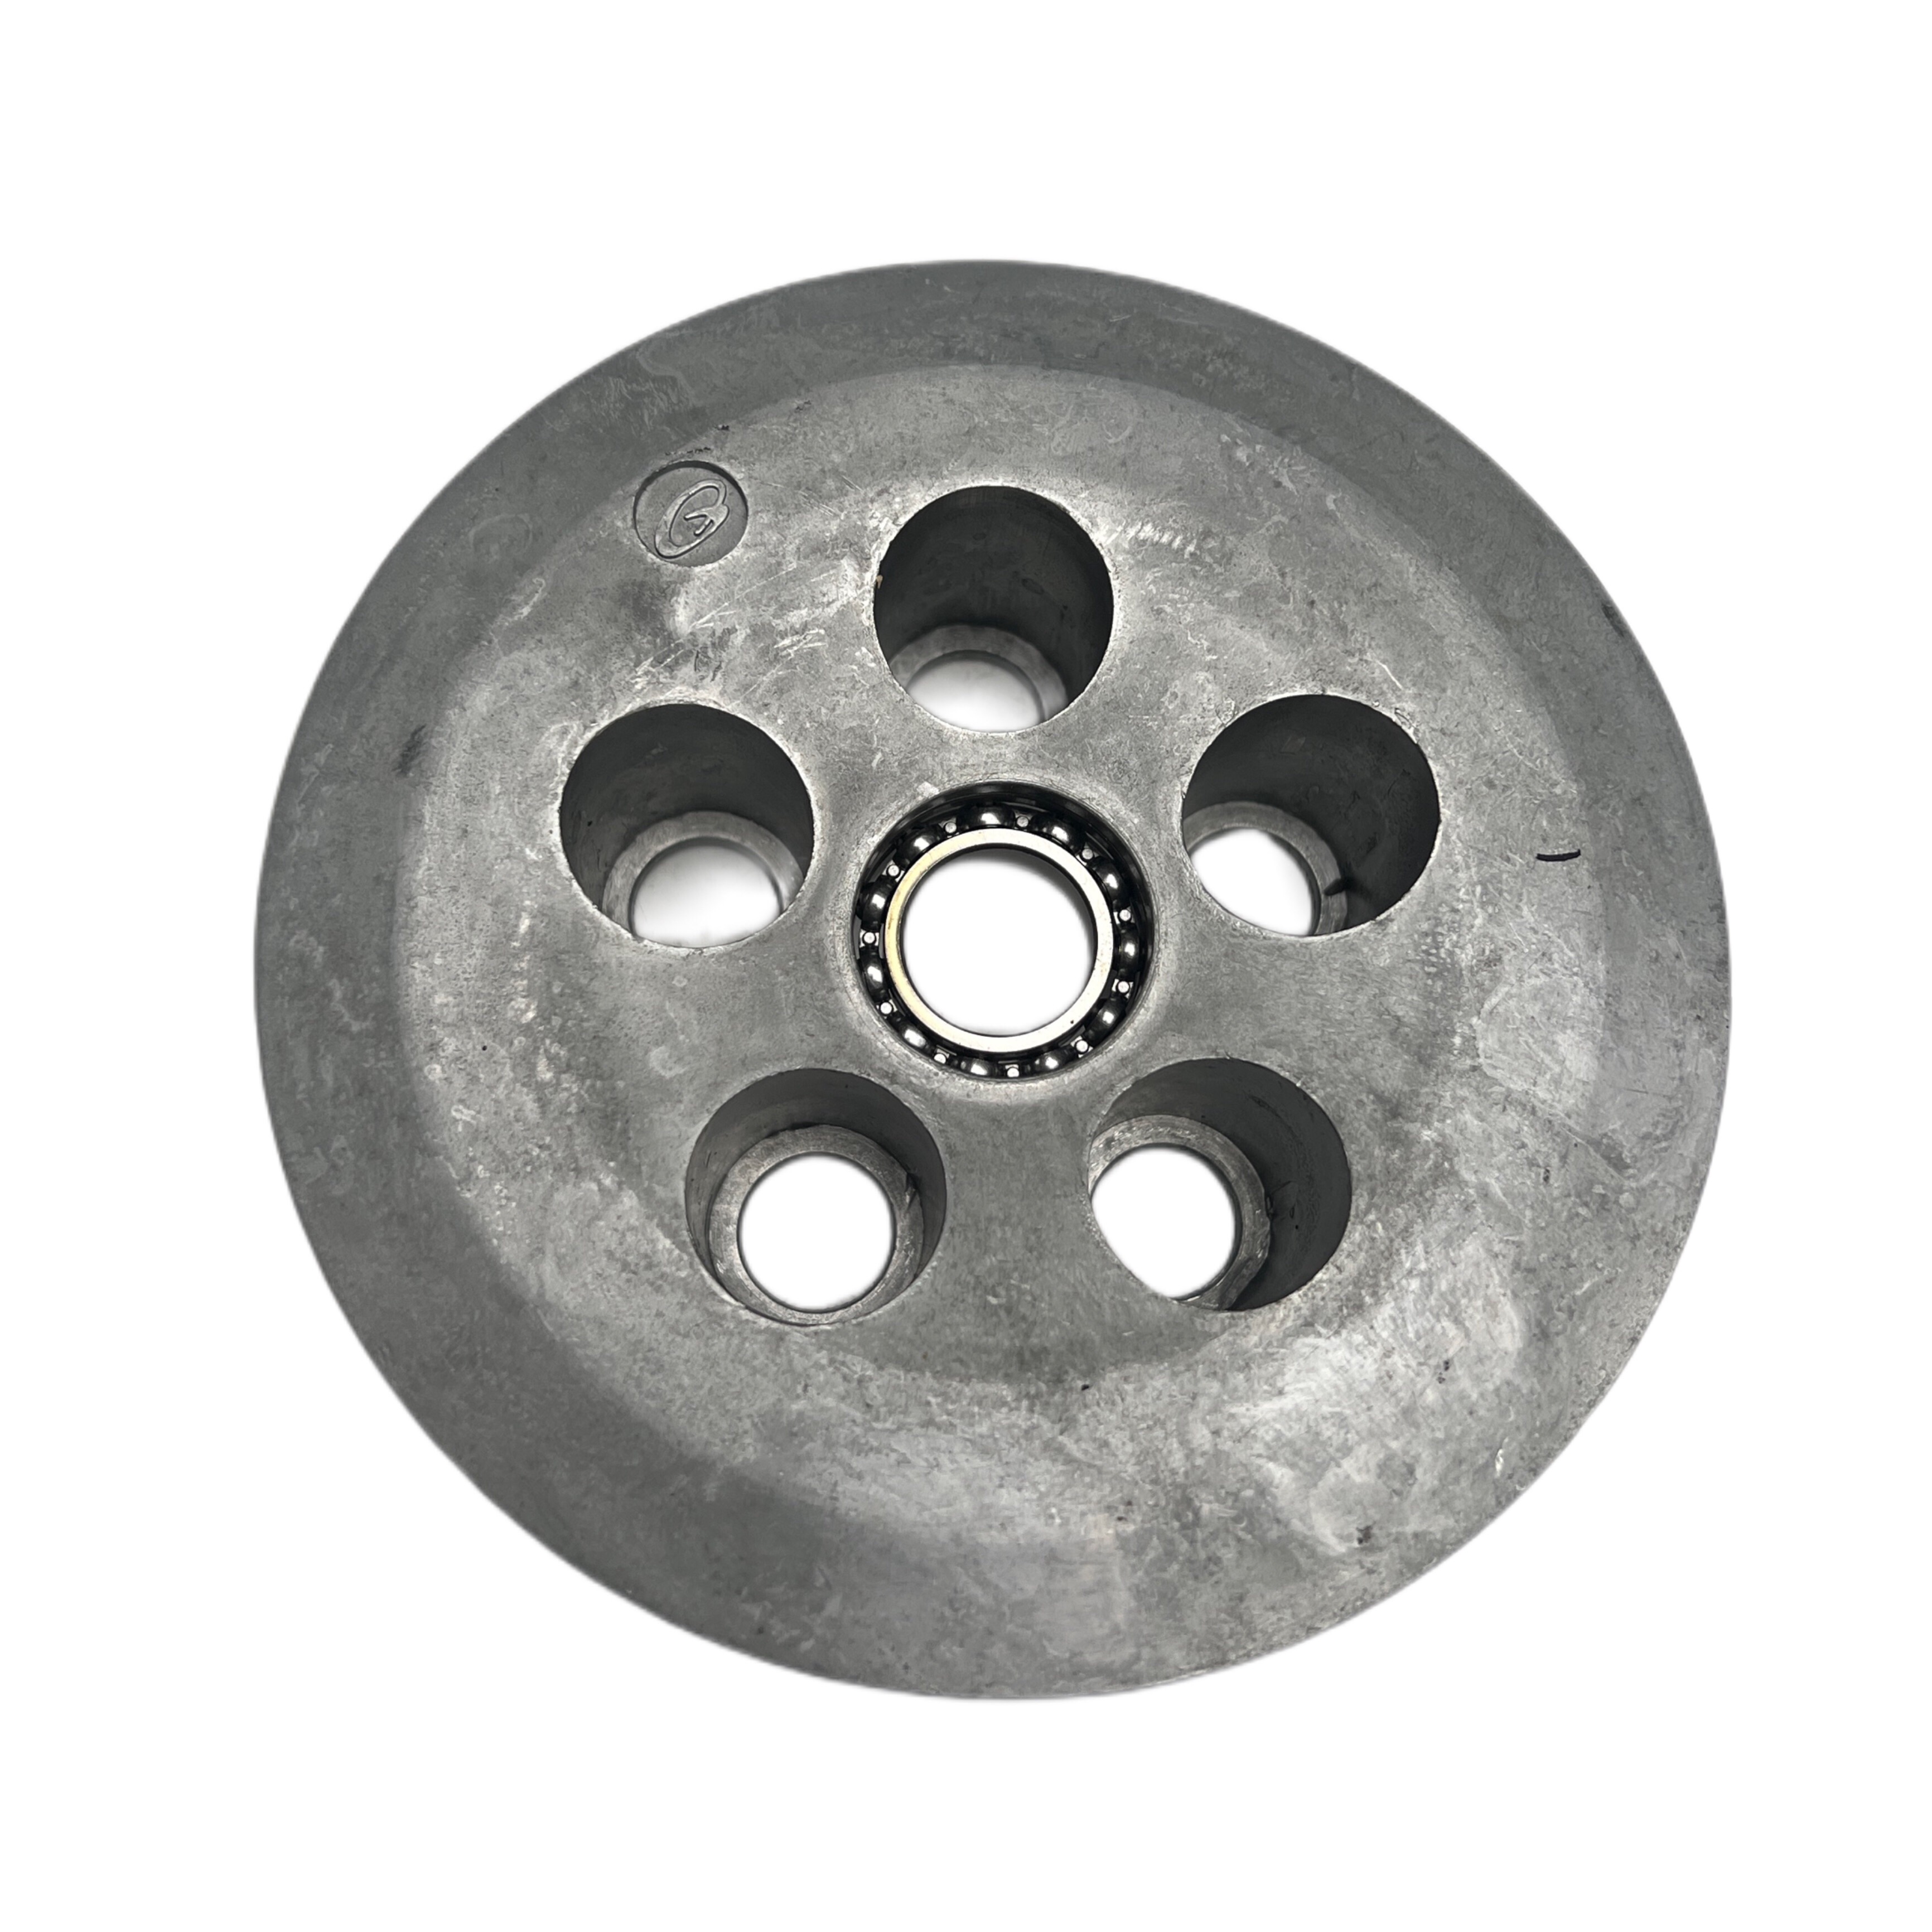 Clutch Drive Cover with Bearing